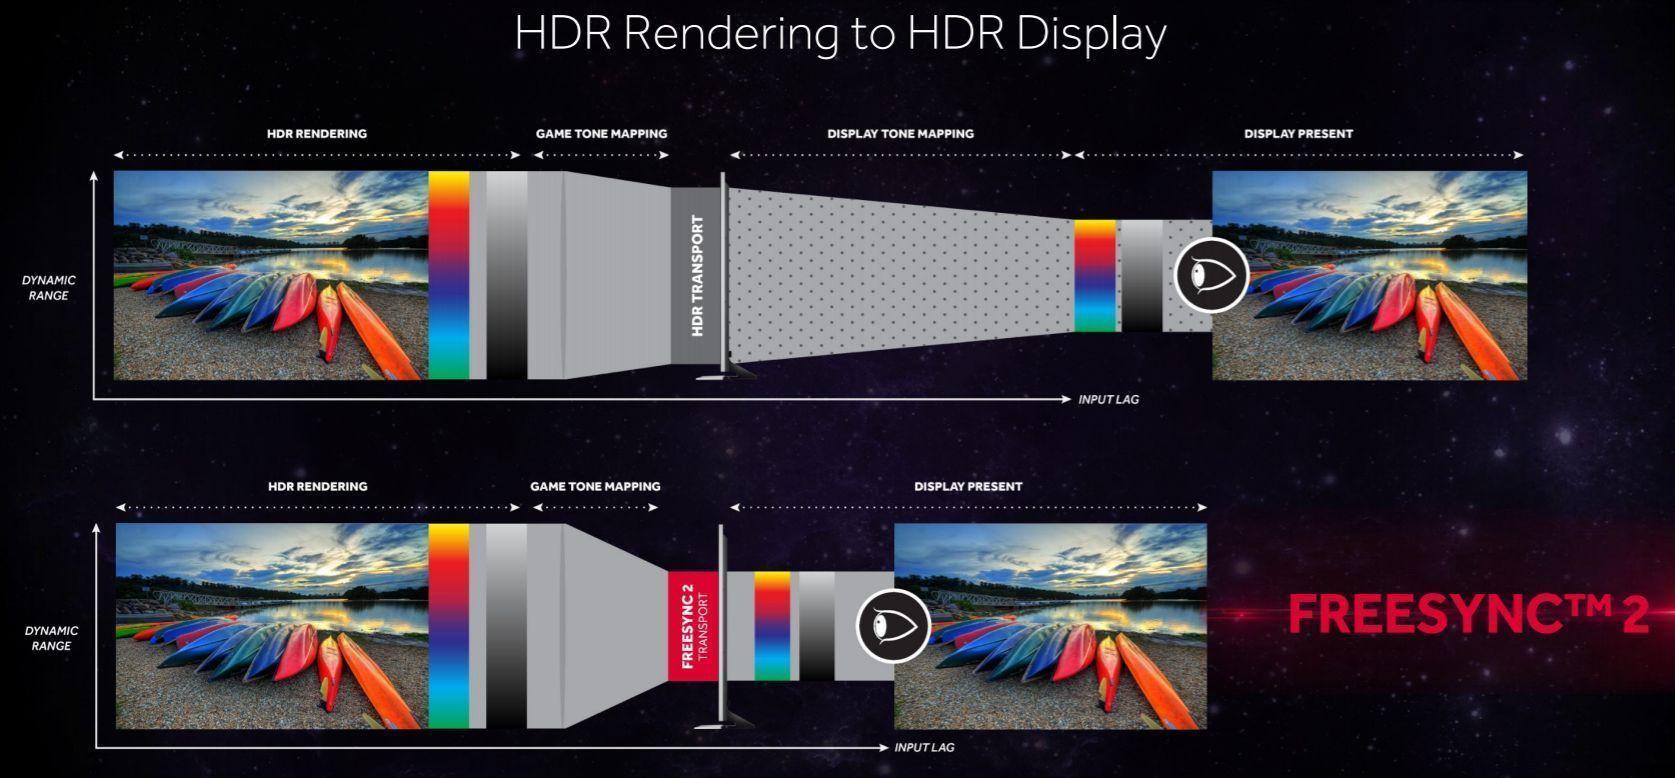 HDR Rendering to HDR Display